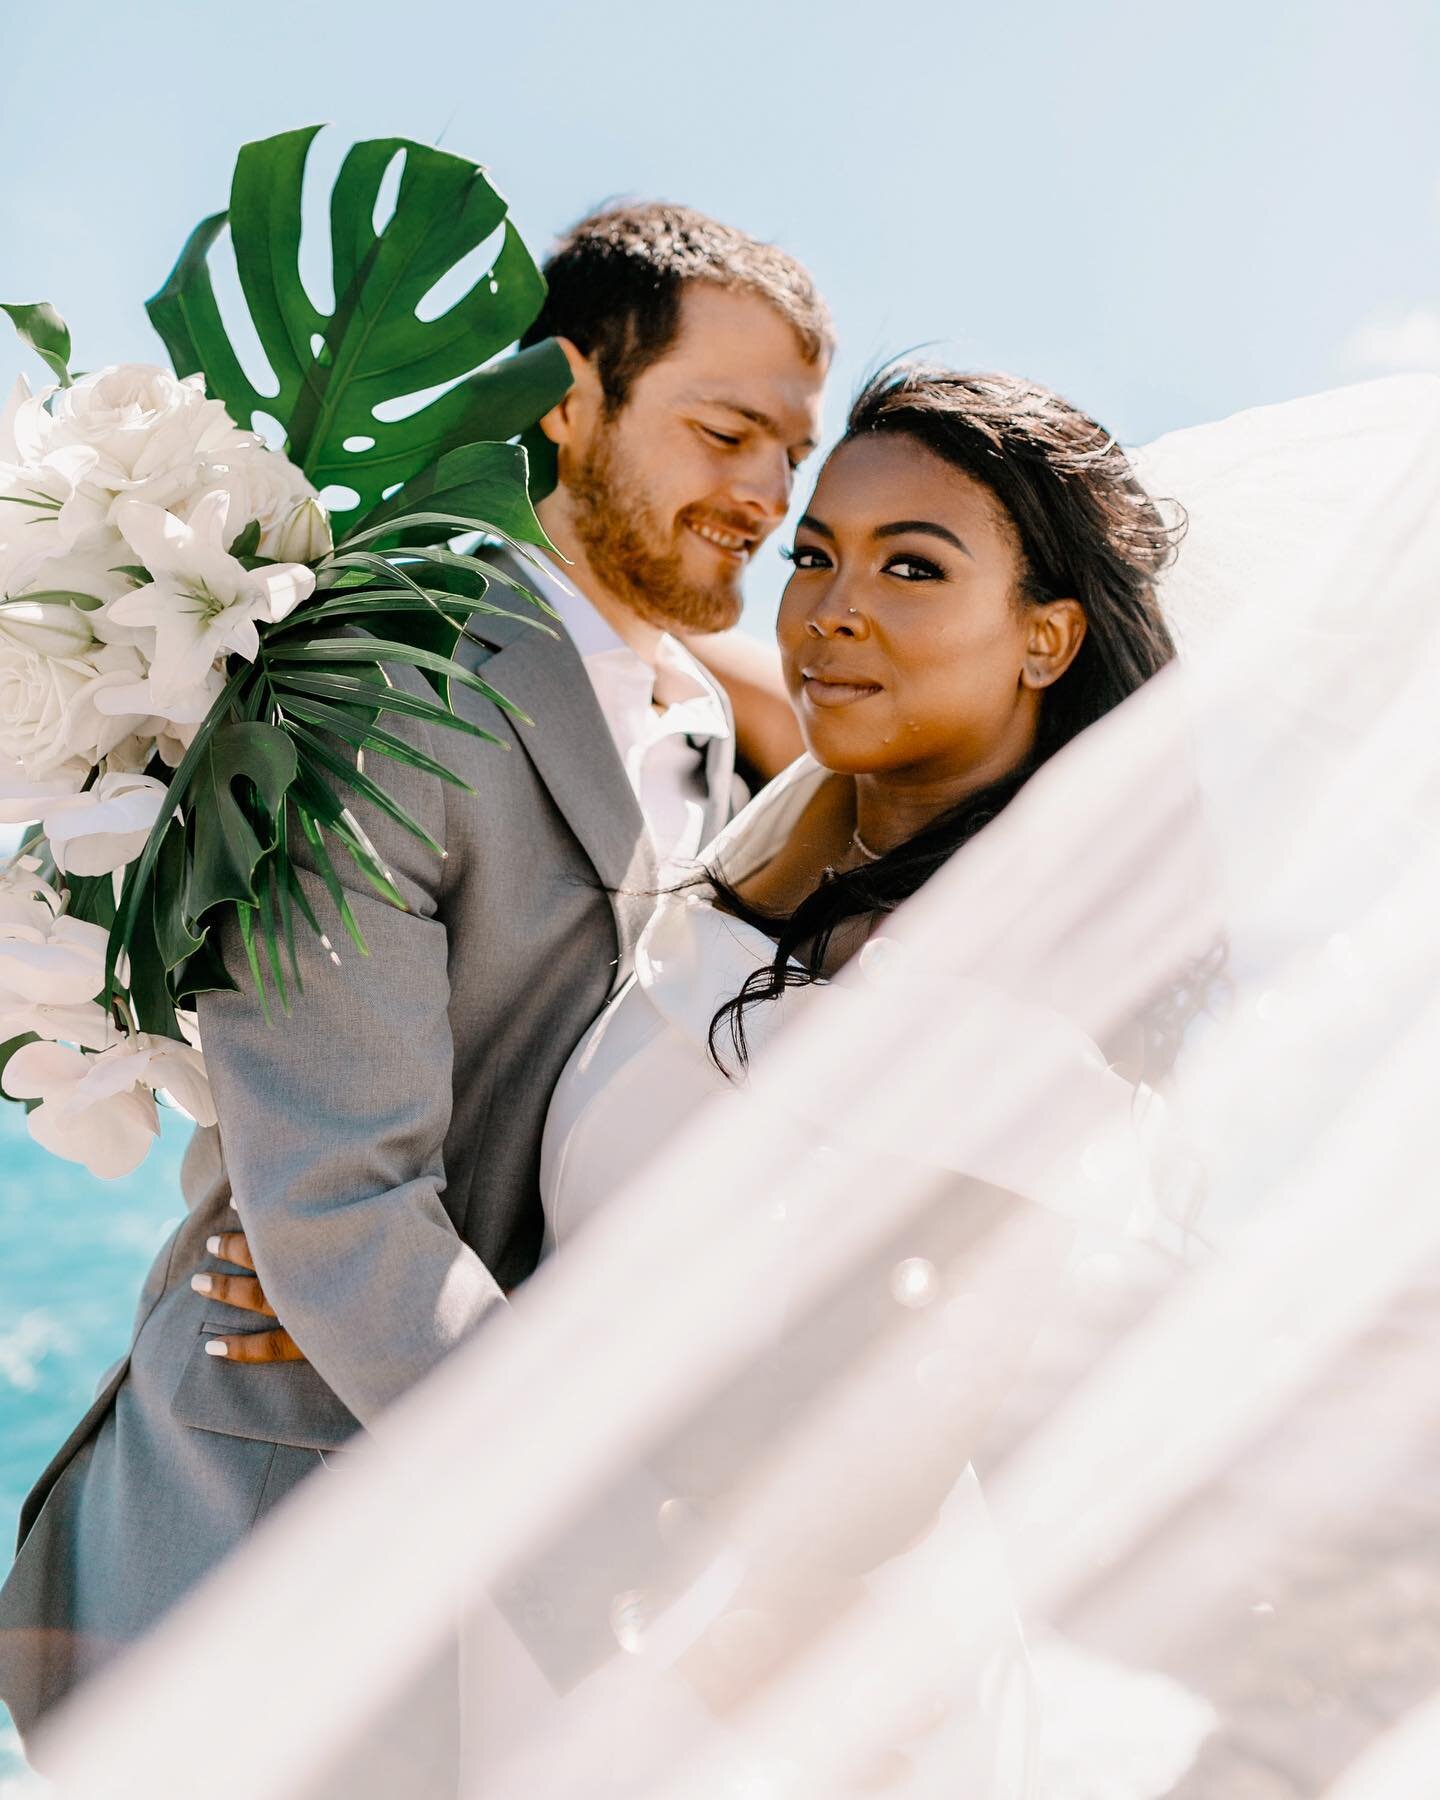 Veil or no veil? Honestly, it&rsquo;s up to you. I LOVE a good veil moment (I mean, look at these two 🤩🤩) Veils allow us photogs an extra prop to play around with and incorporate into your photos. But veils can also be tedious to always readjust an